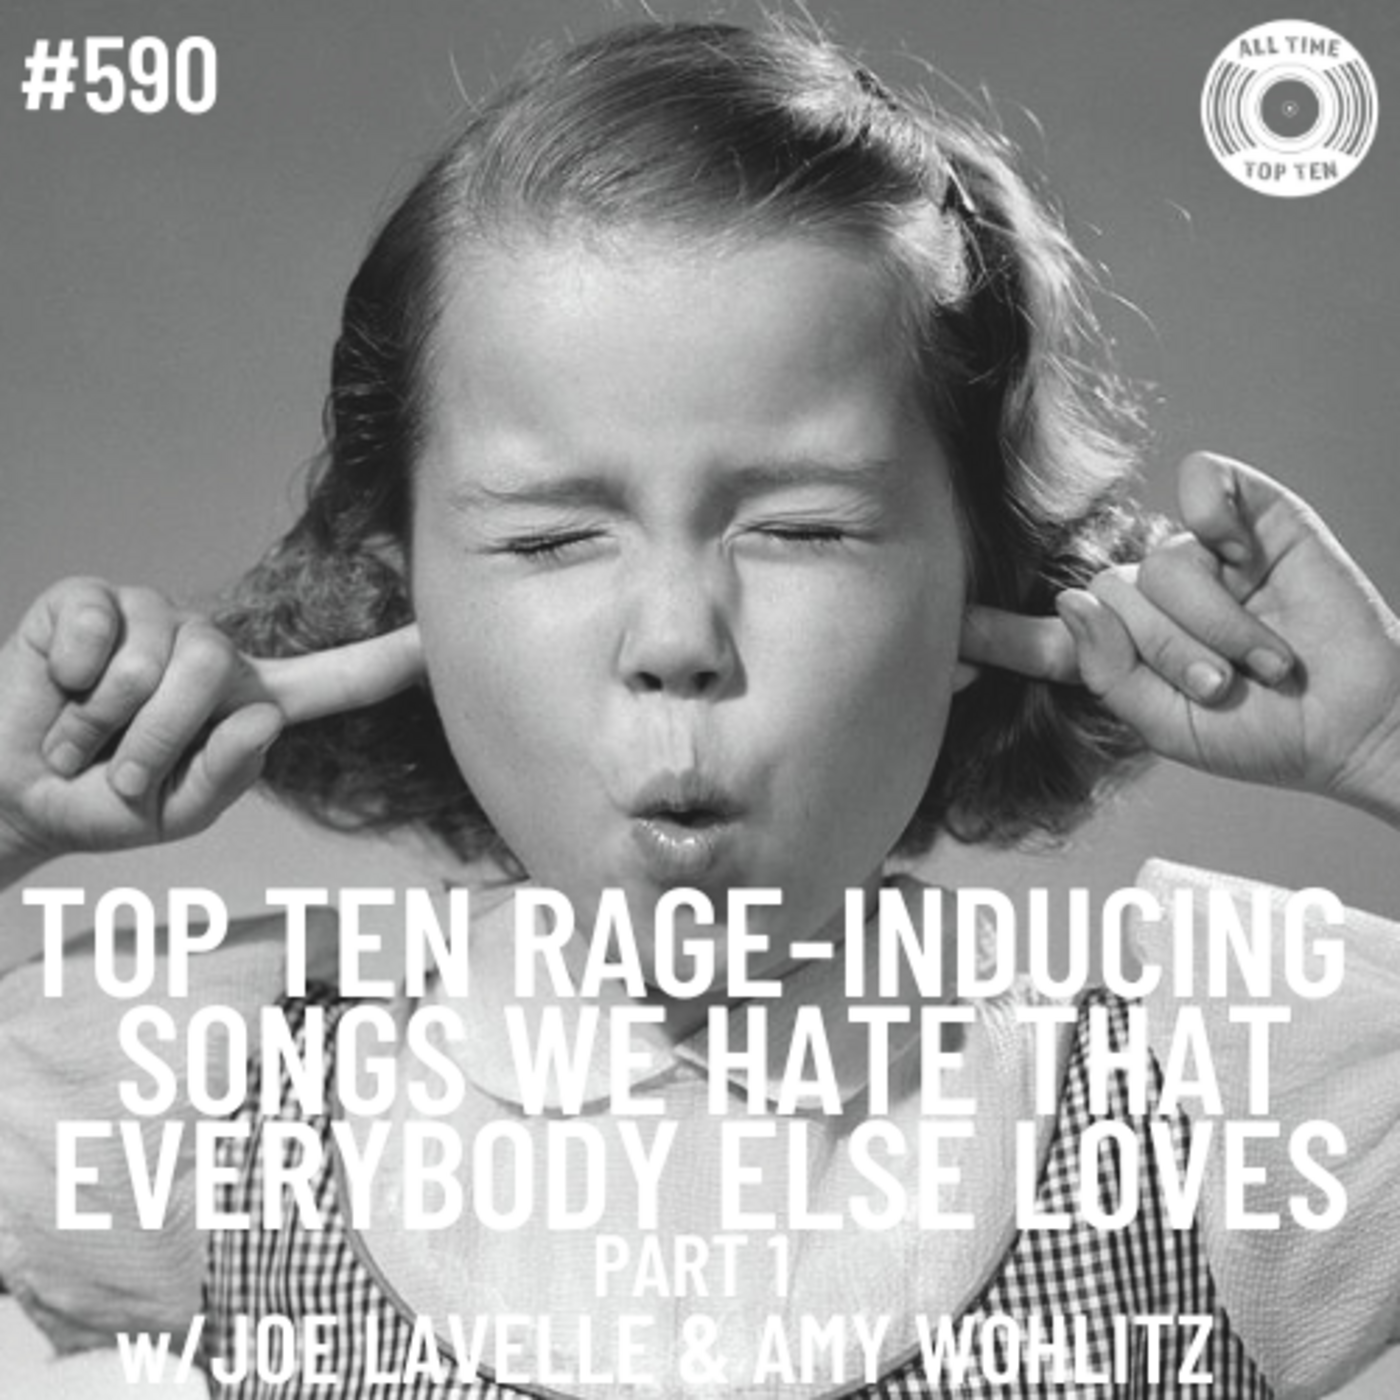 Episode 590 - Top Ten Rage-Inducing Songs We Hate That Everybody Else Loves Part 1 w/Joe Lavelle & Amy Wohlitz